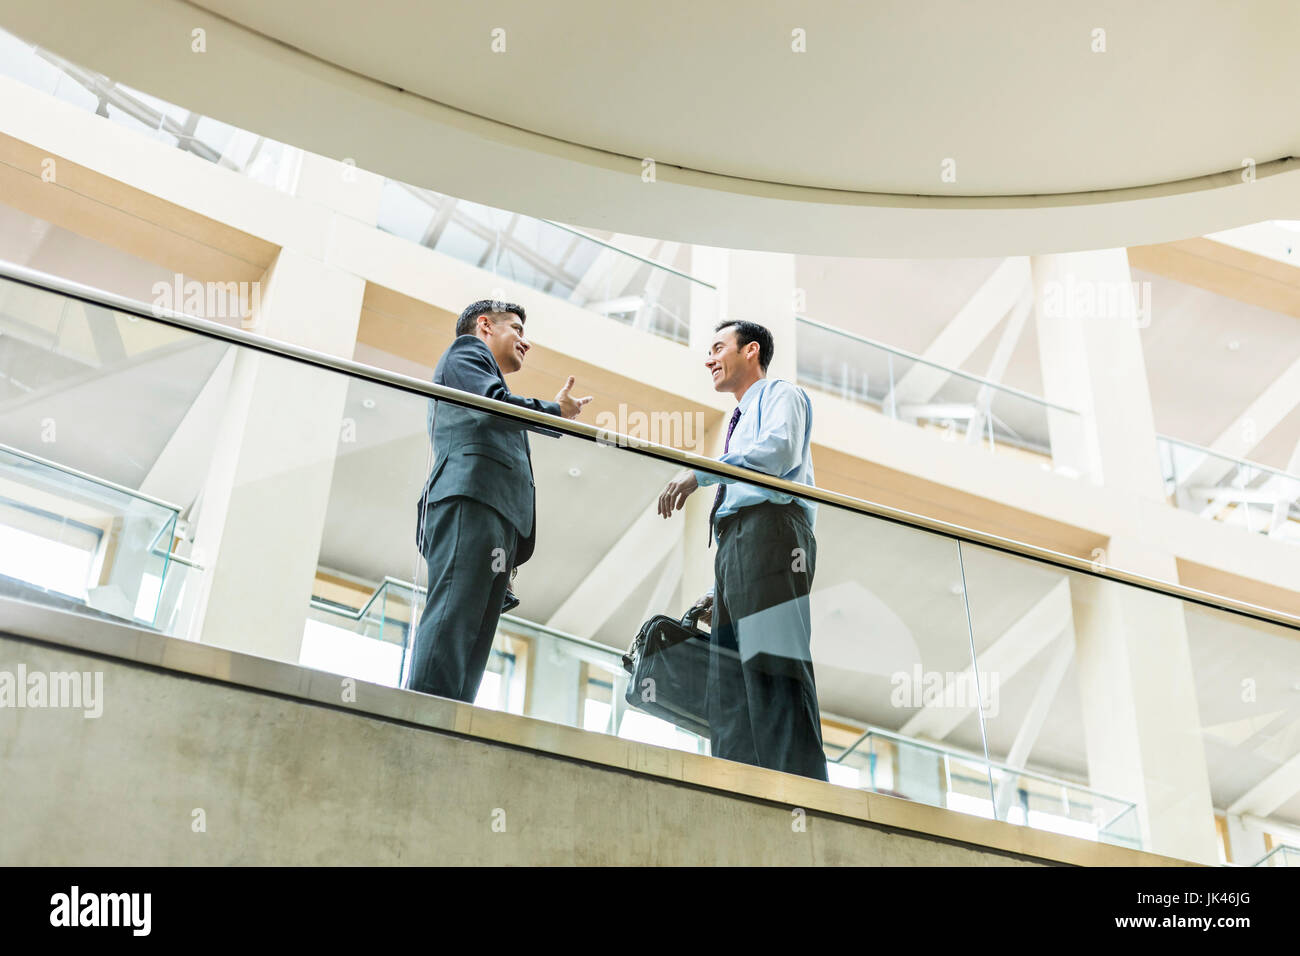 Smiling Mixed Race businessmen talking in lobby Stock Photo